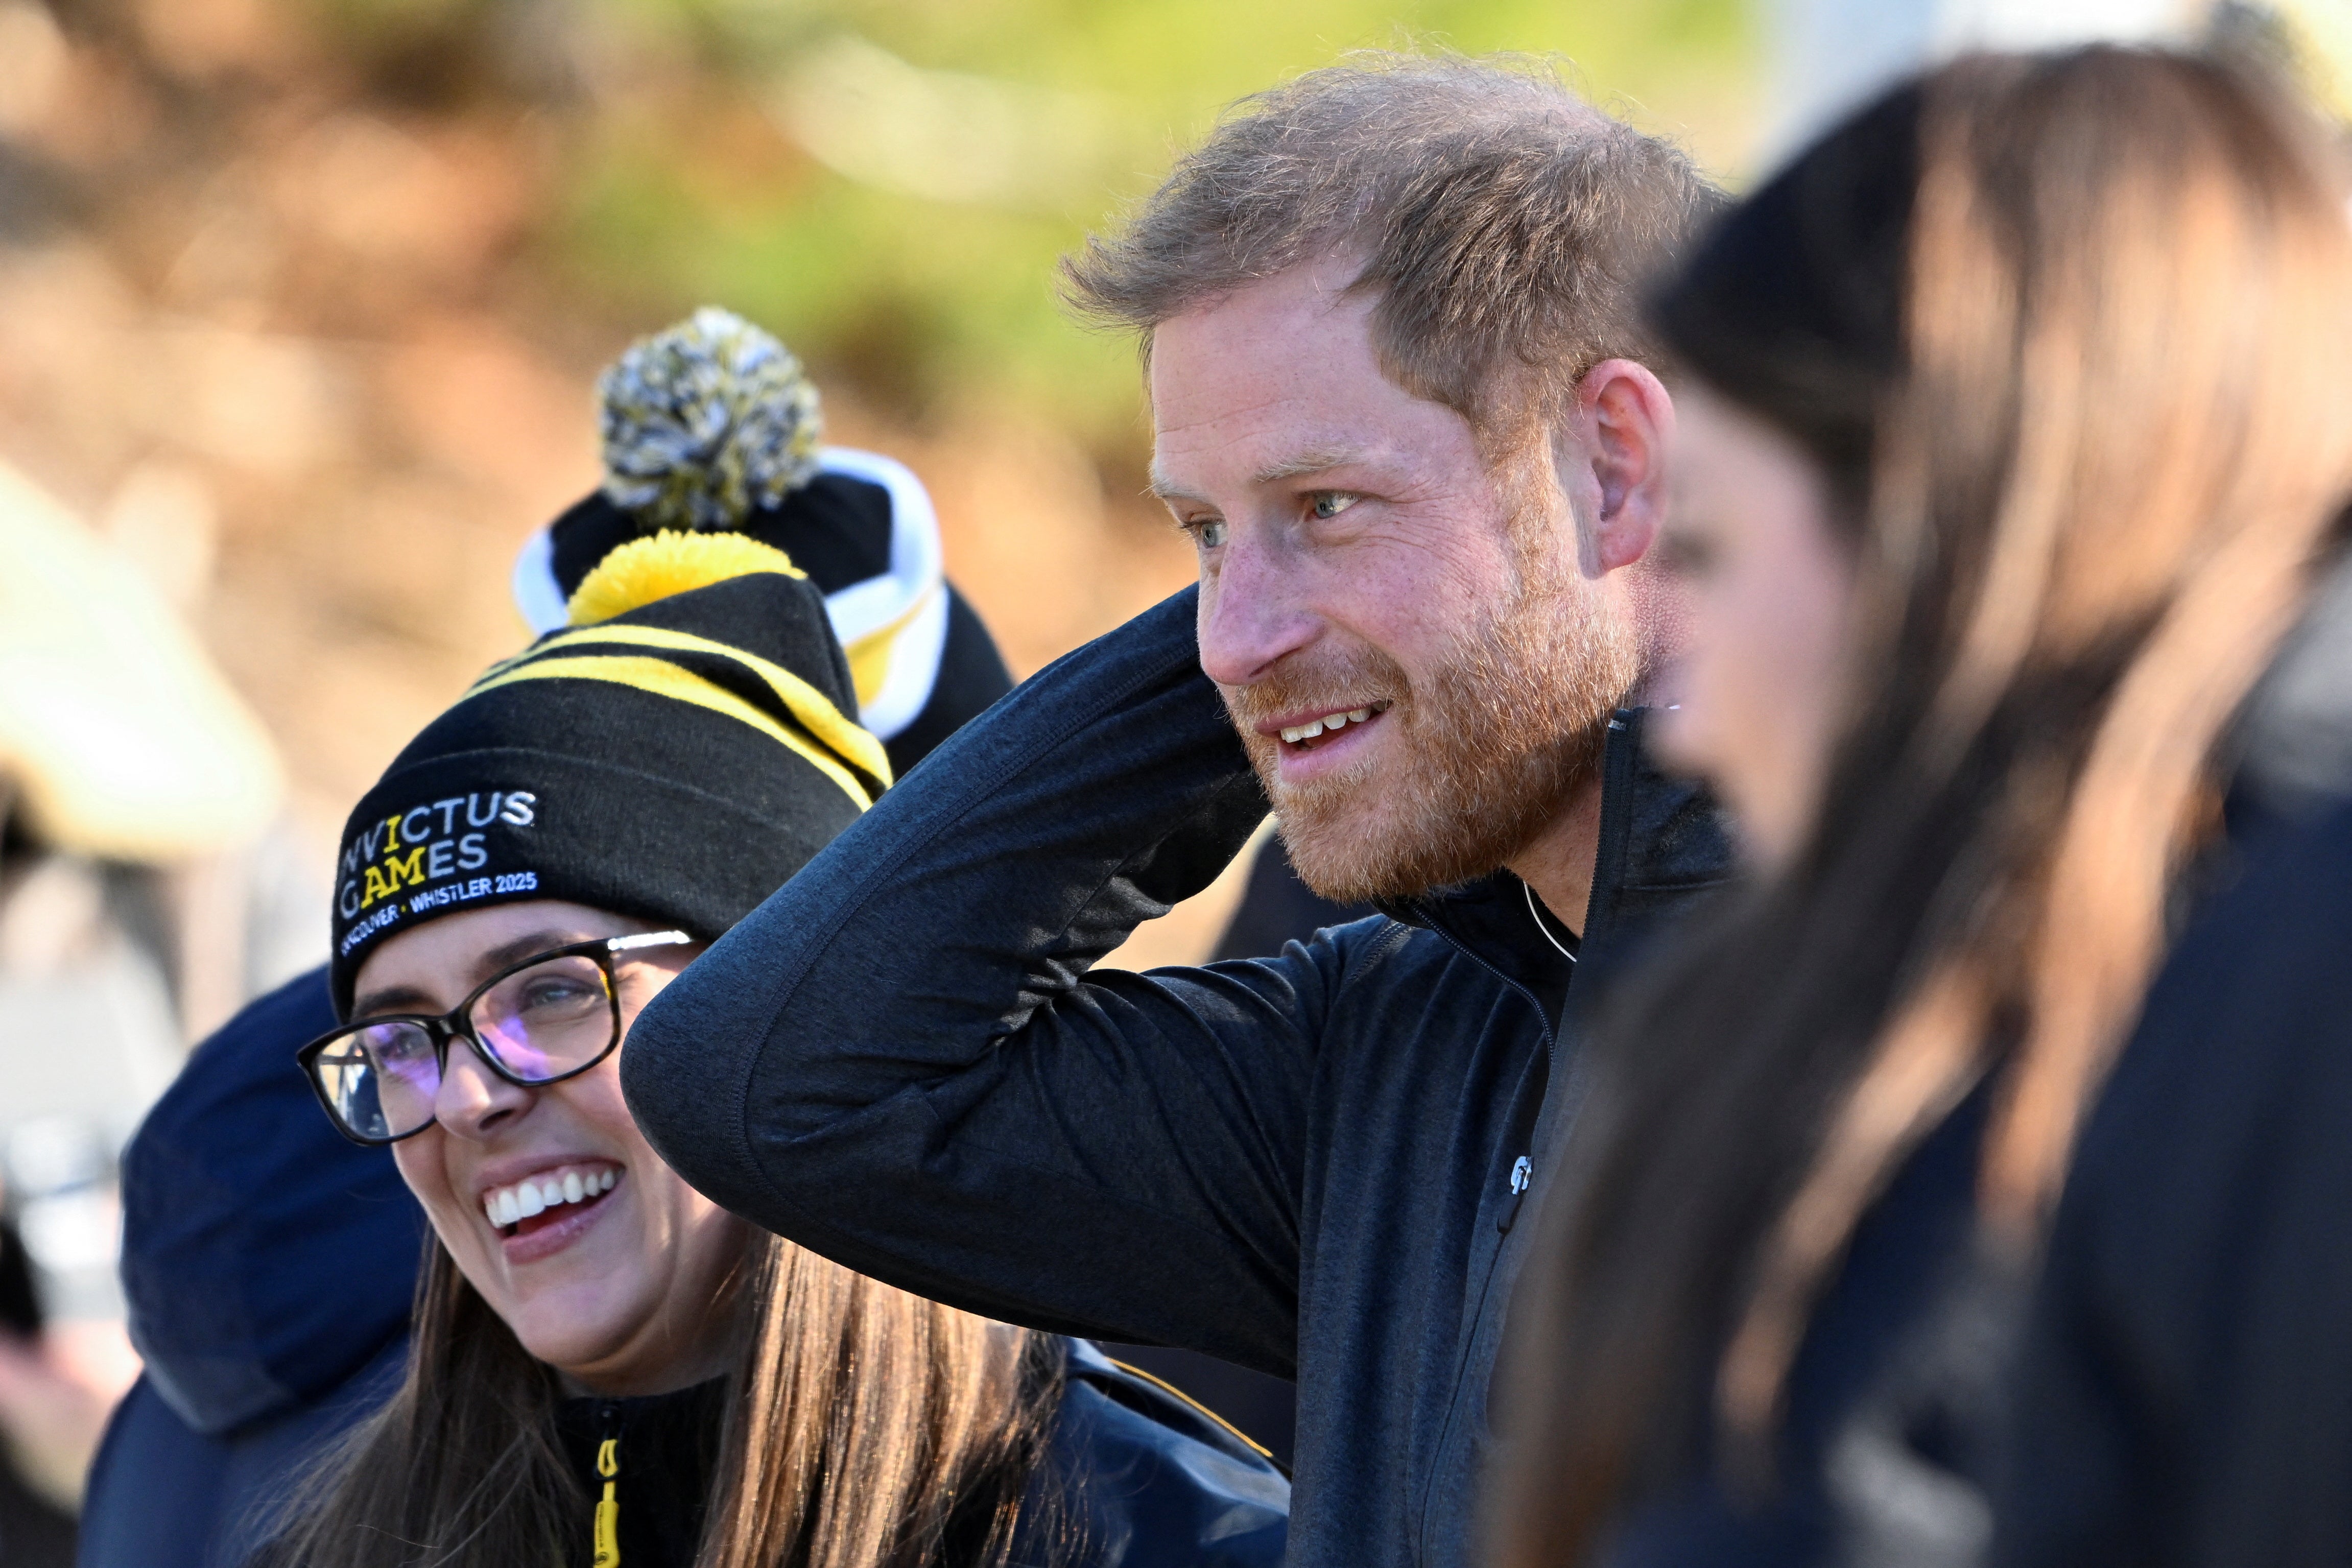 The Duke visits the Whistler Sliding Centre for a training camp for the Invictus Games being held next year